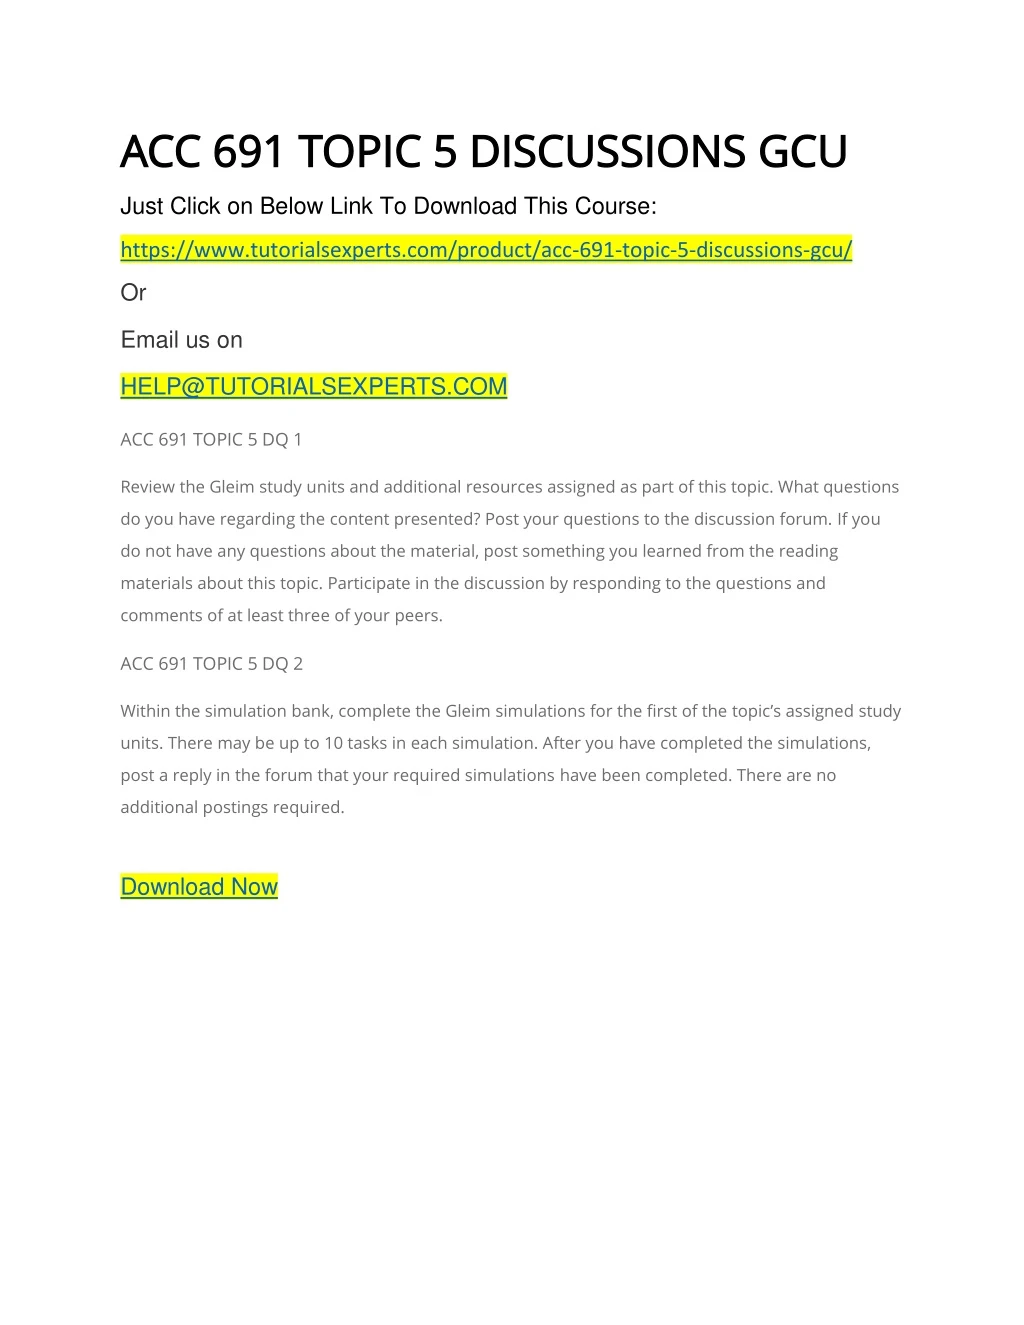 acc 691 topic 5 disc acc 691 topic 5 discussions